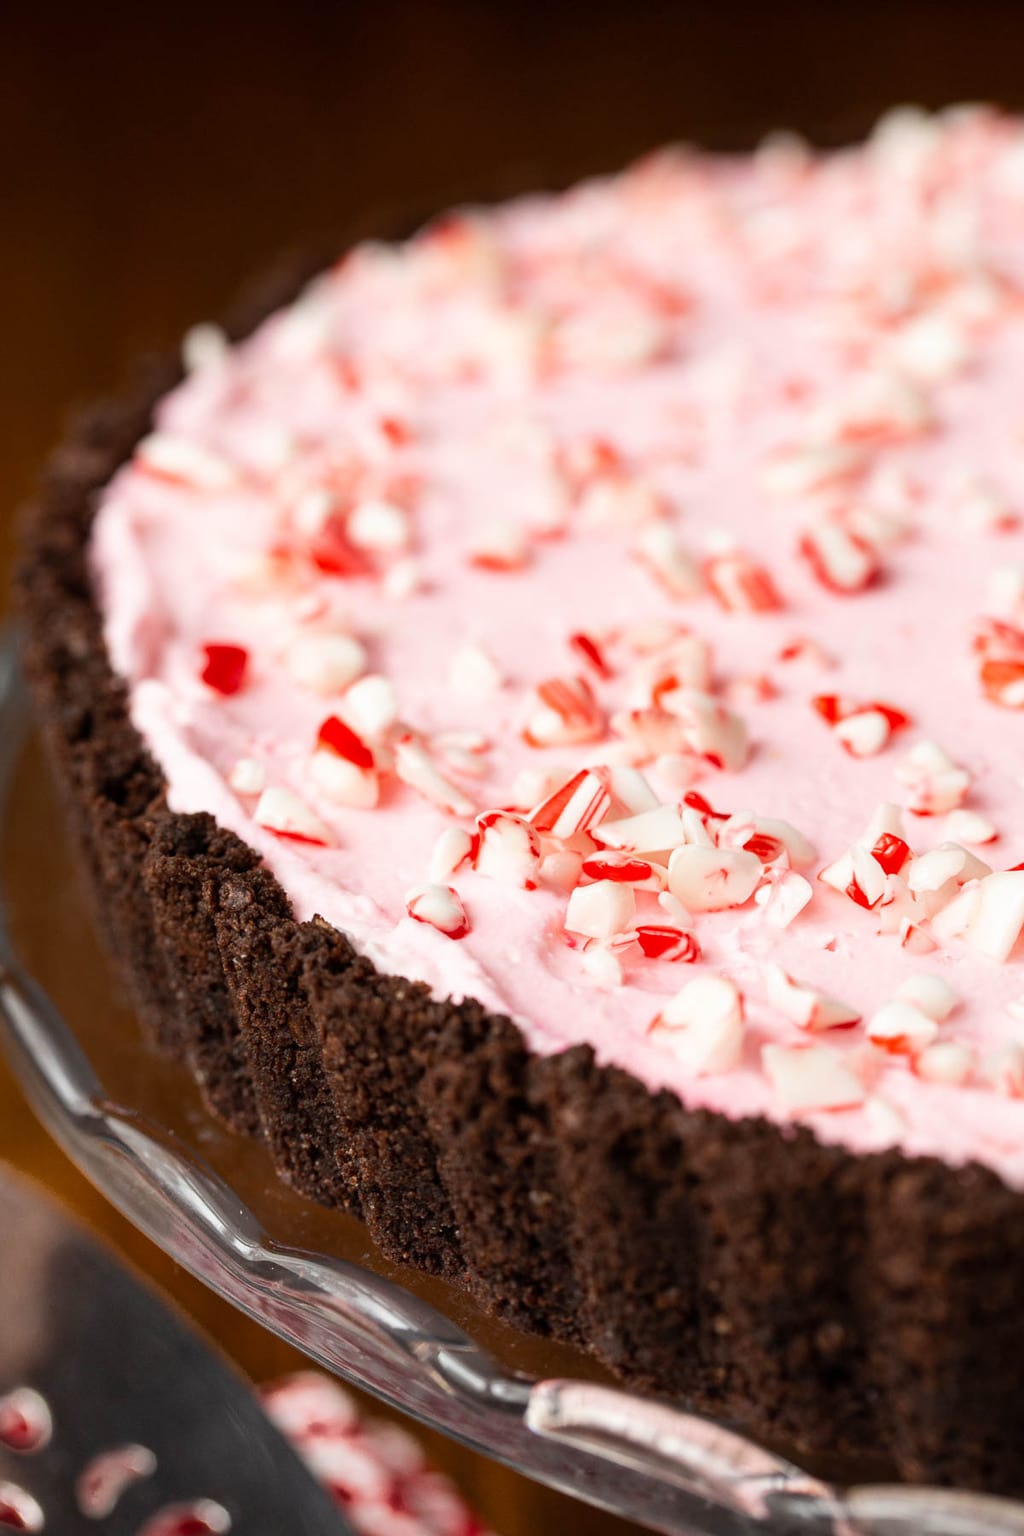 Vertical extreme closeup photo of the side and top of a Peppermint Candy Cane Tart on a glass serving plate.